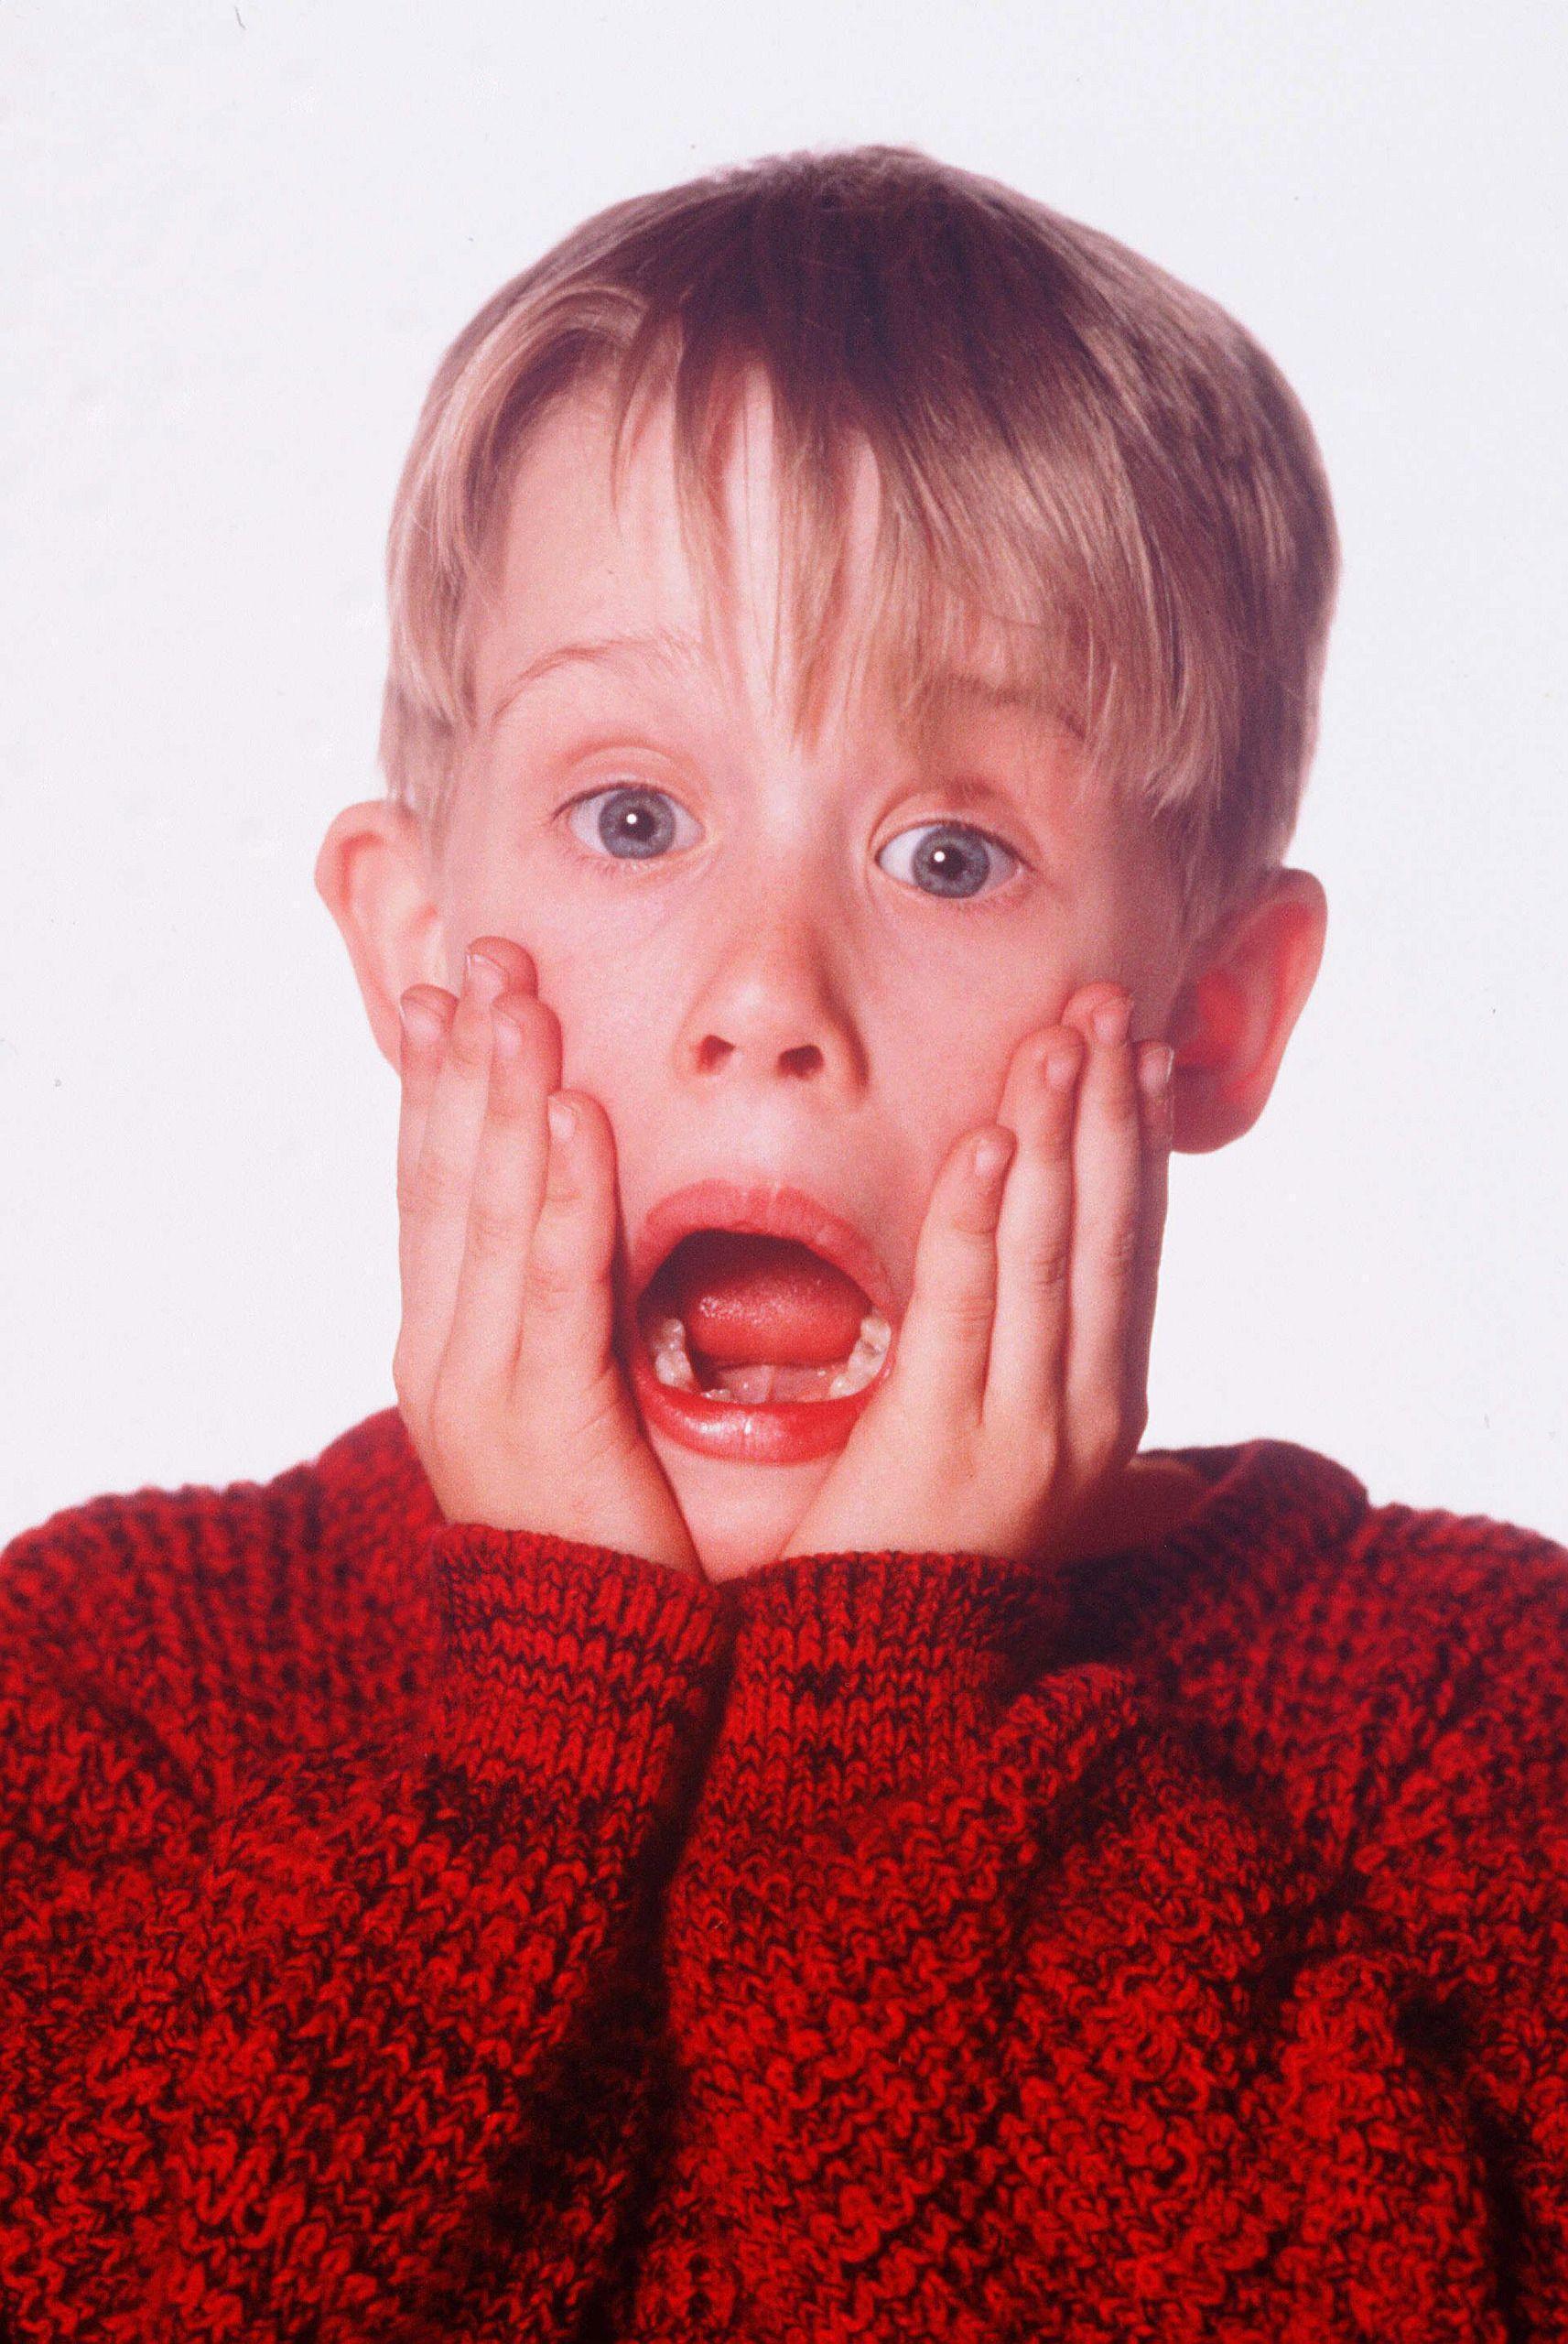 HD Home Alone Wallpaper and Photo. HD Movie Wallpaper